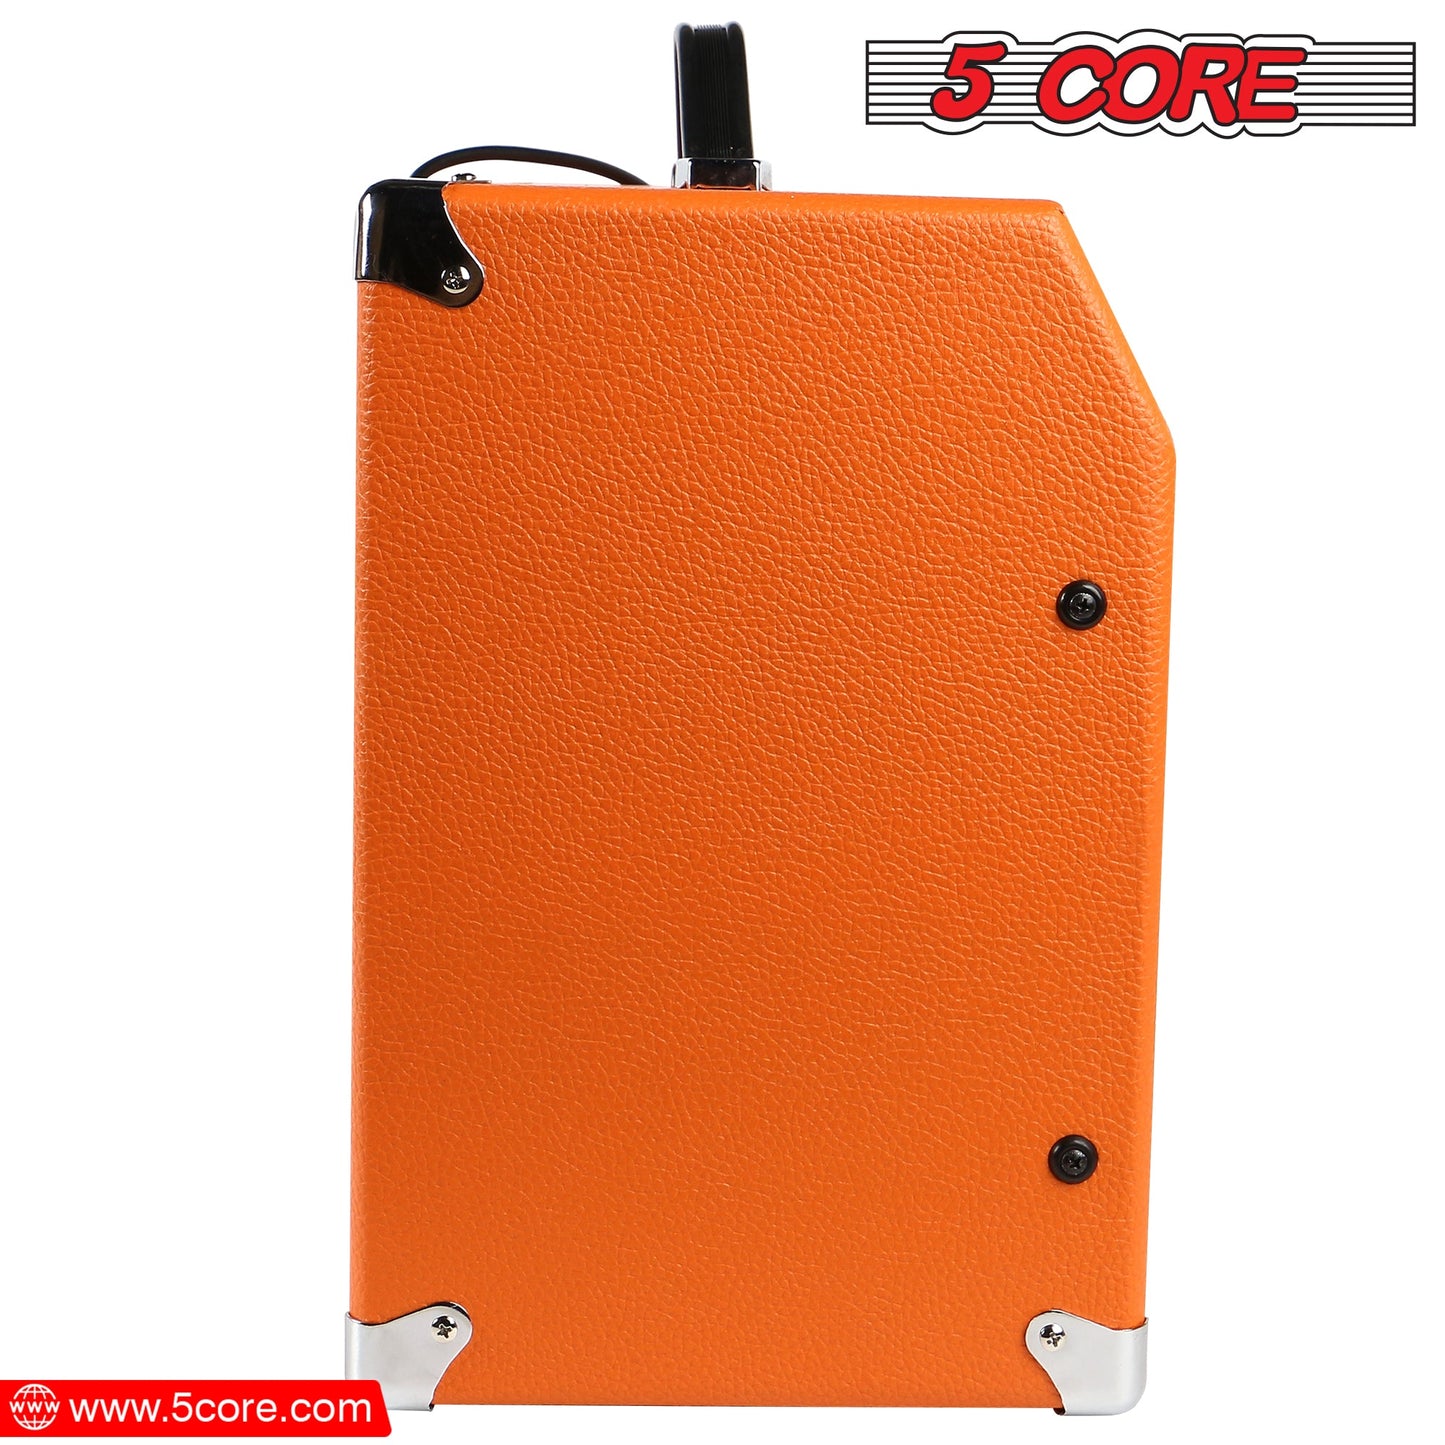 5 Core 40W Guitar Amplifier Orange - Clean and Distortion Channel - Electric Amp with Equalization and AUX Line Input - for Recording Studio, Practice Room, Small Courtyard- GA 40 ORG-3